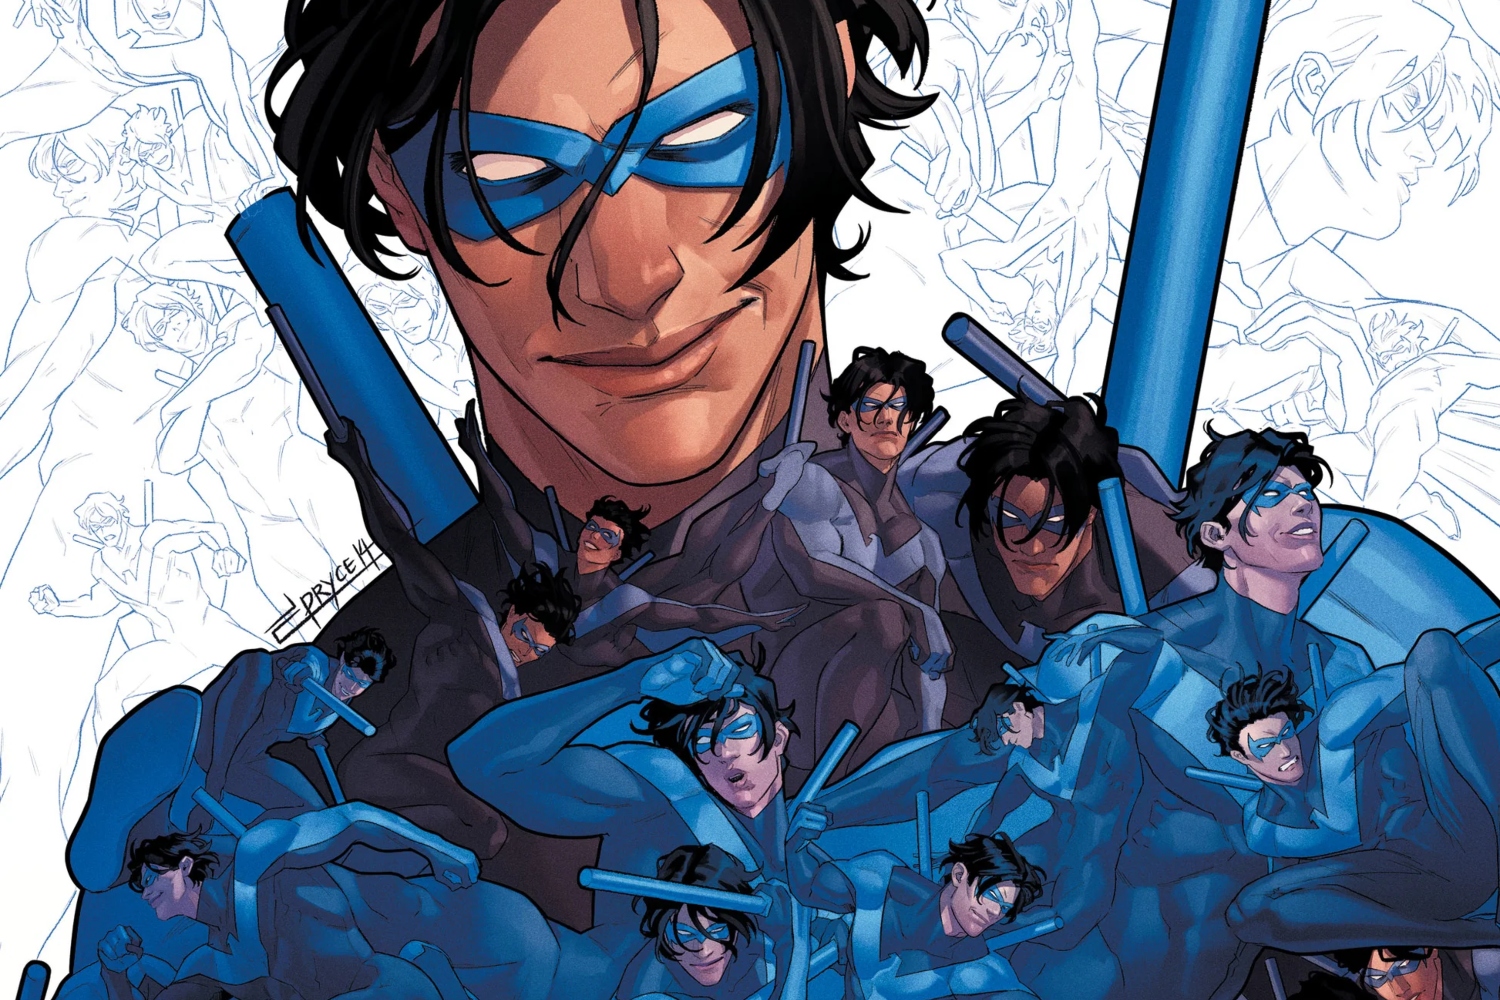 Marv Wolfman tells us about the essence of Nightwing